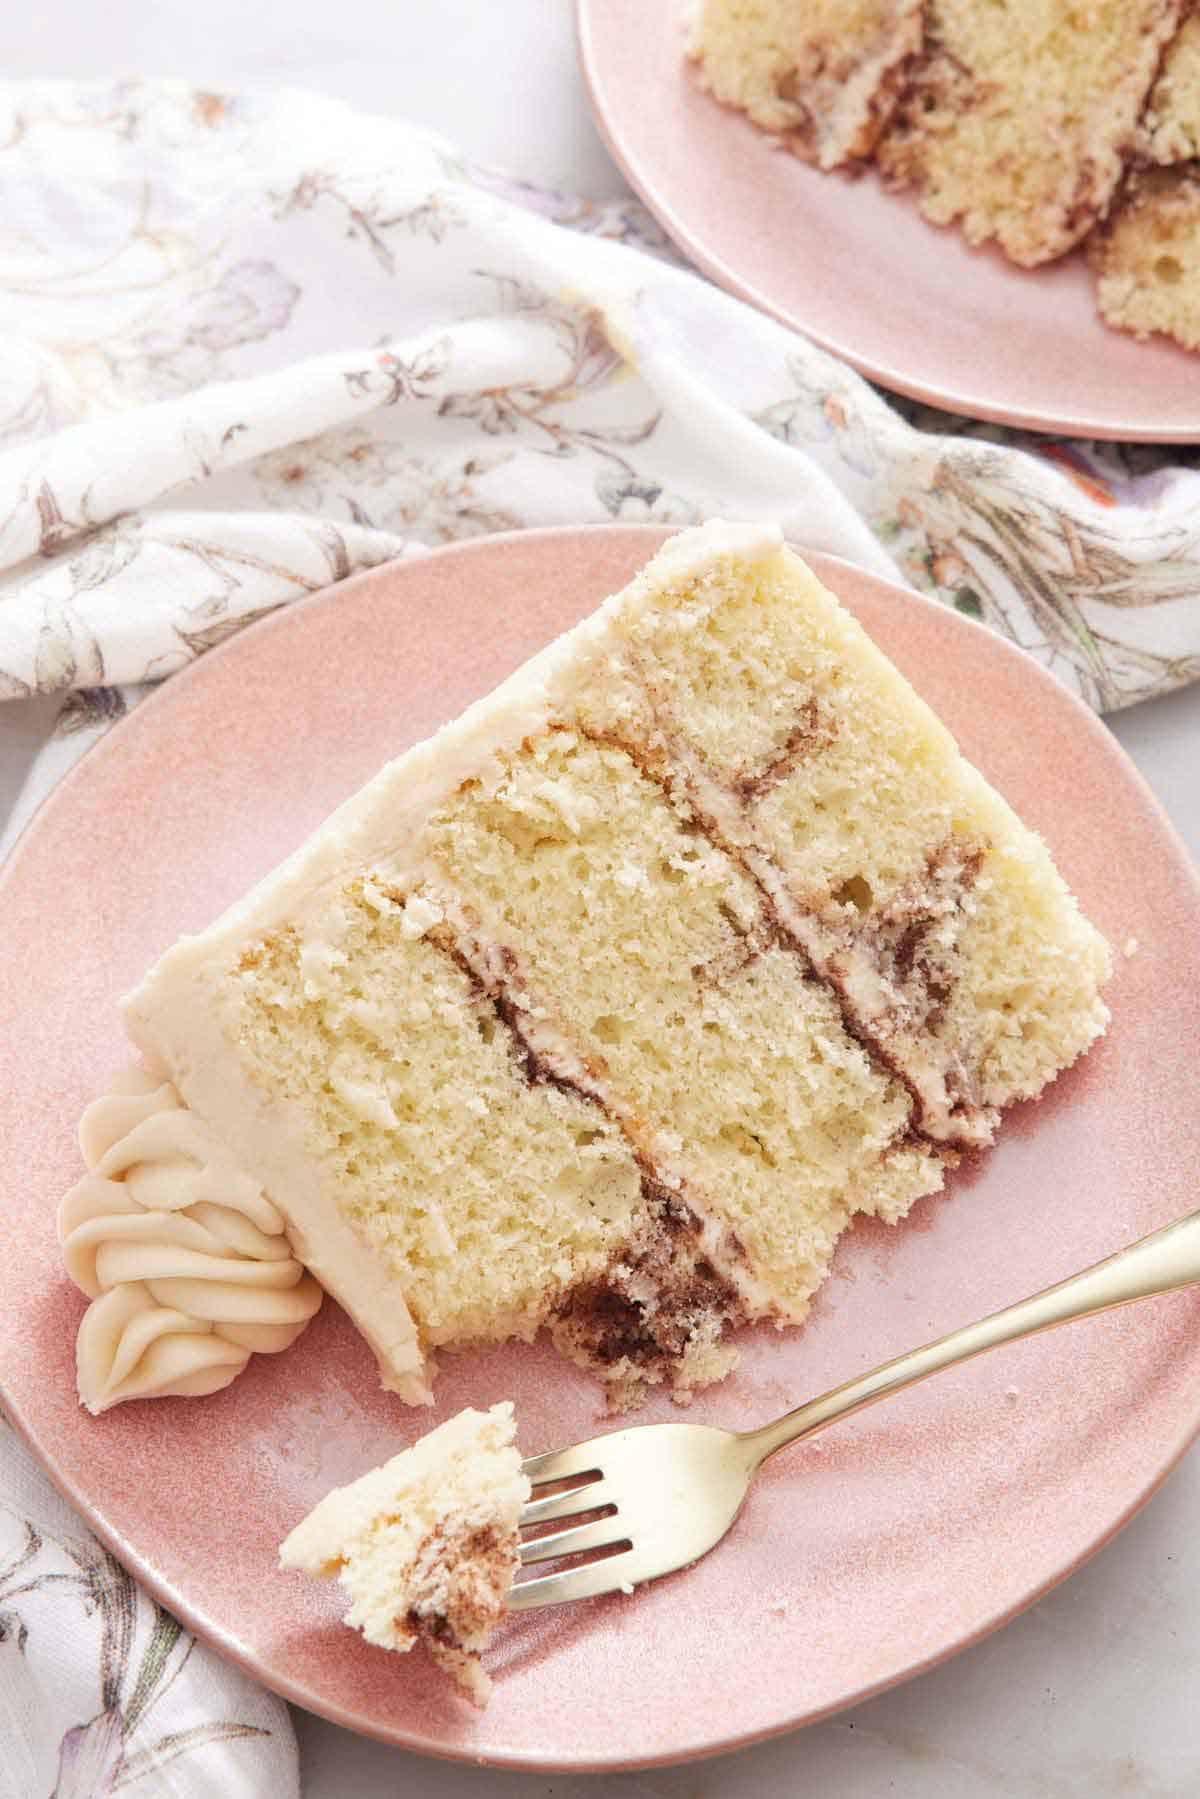 A slice of snickerdoodle cake on a pink plate, showing the three layers. A fork with a bite on it by the cake.